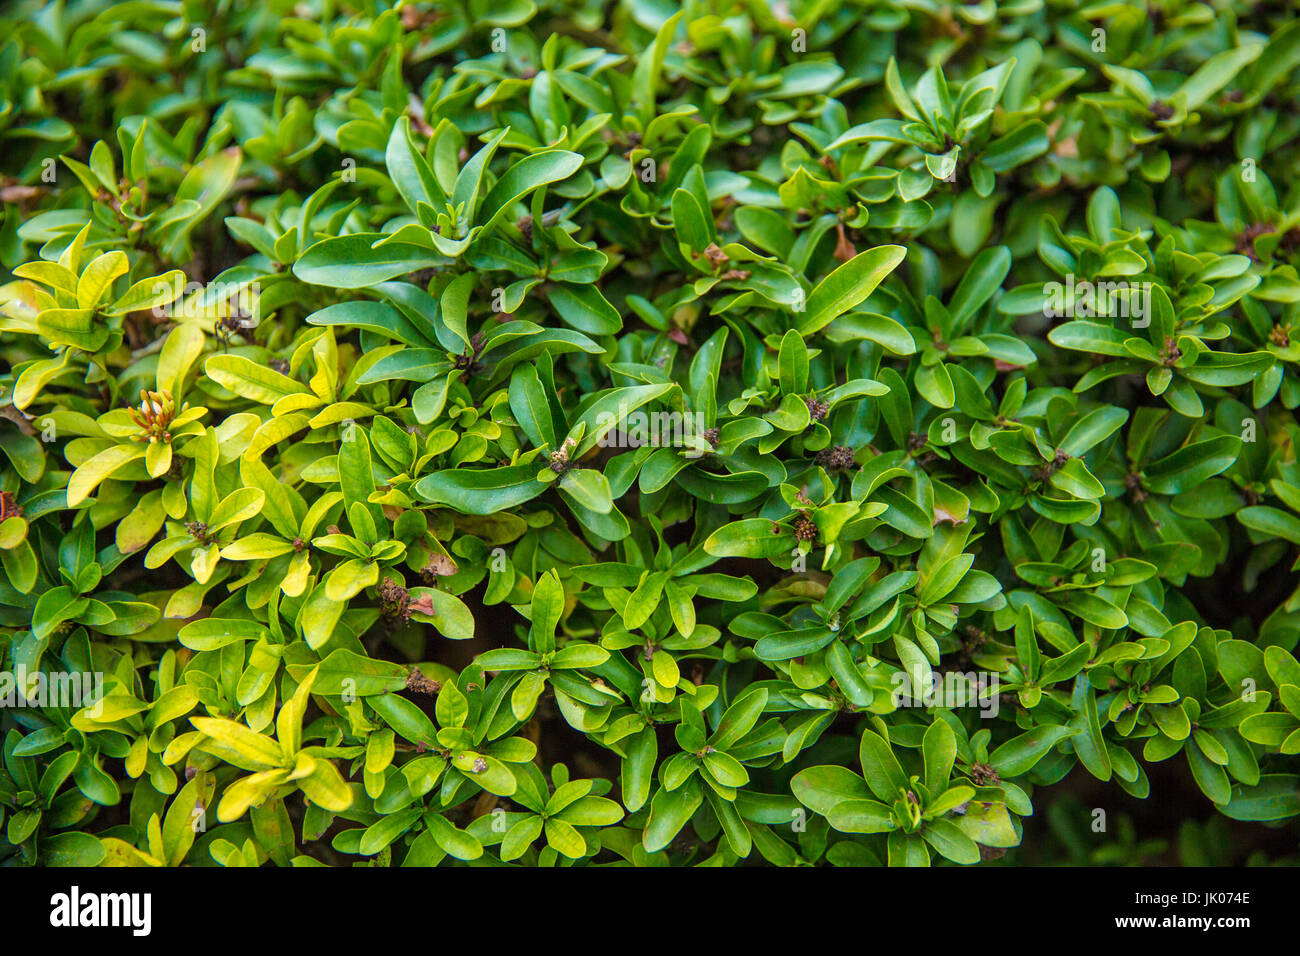 1,915,174 Small Green Leaf Images, Stock Photos, 3D objects, & Vectors